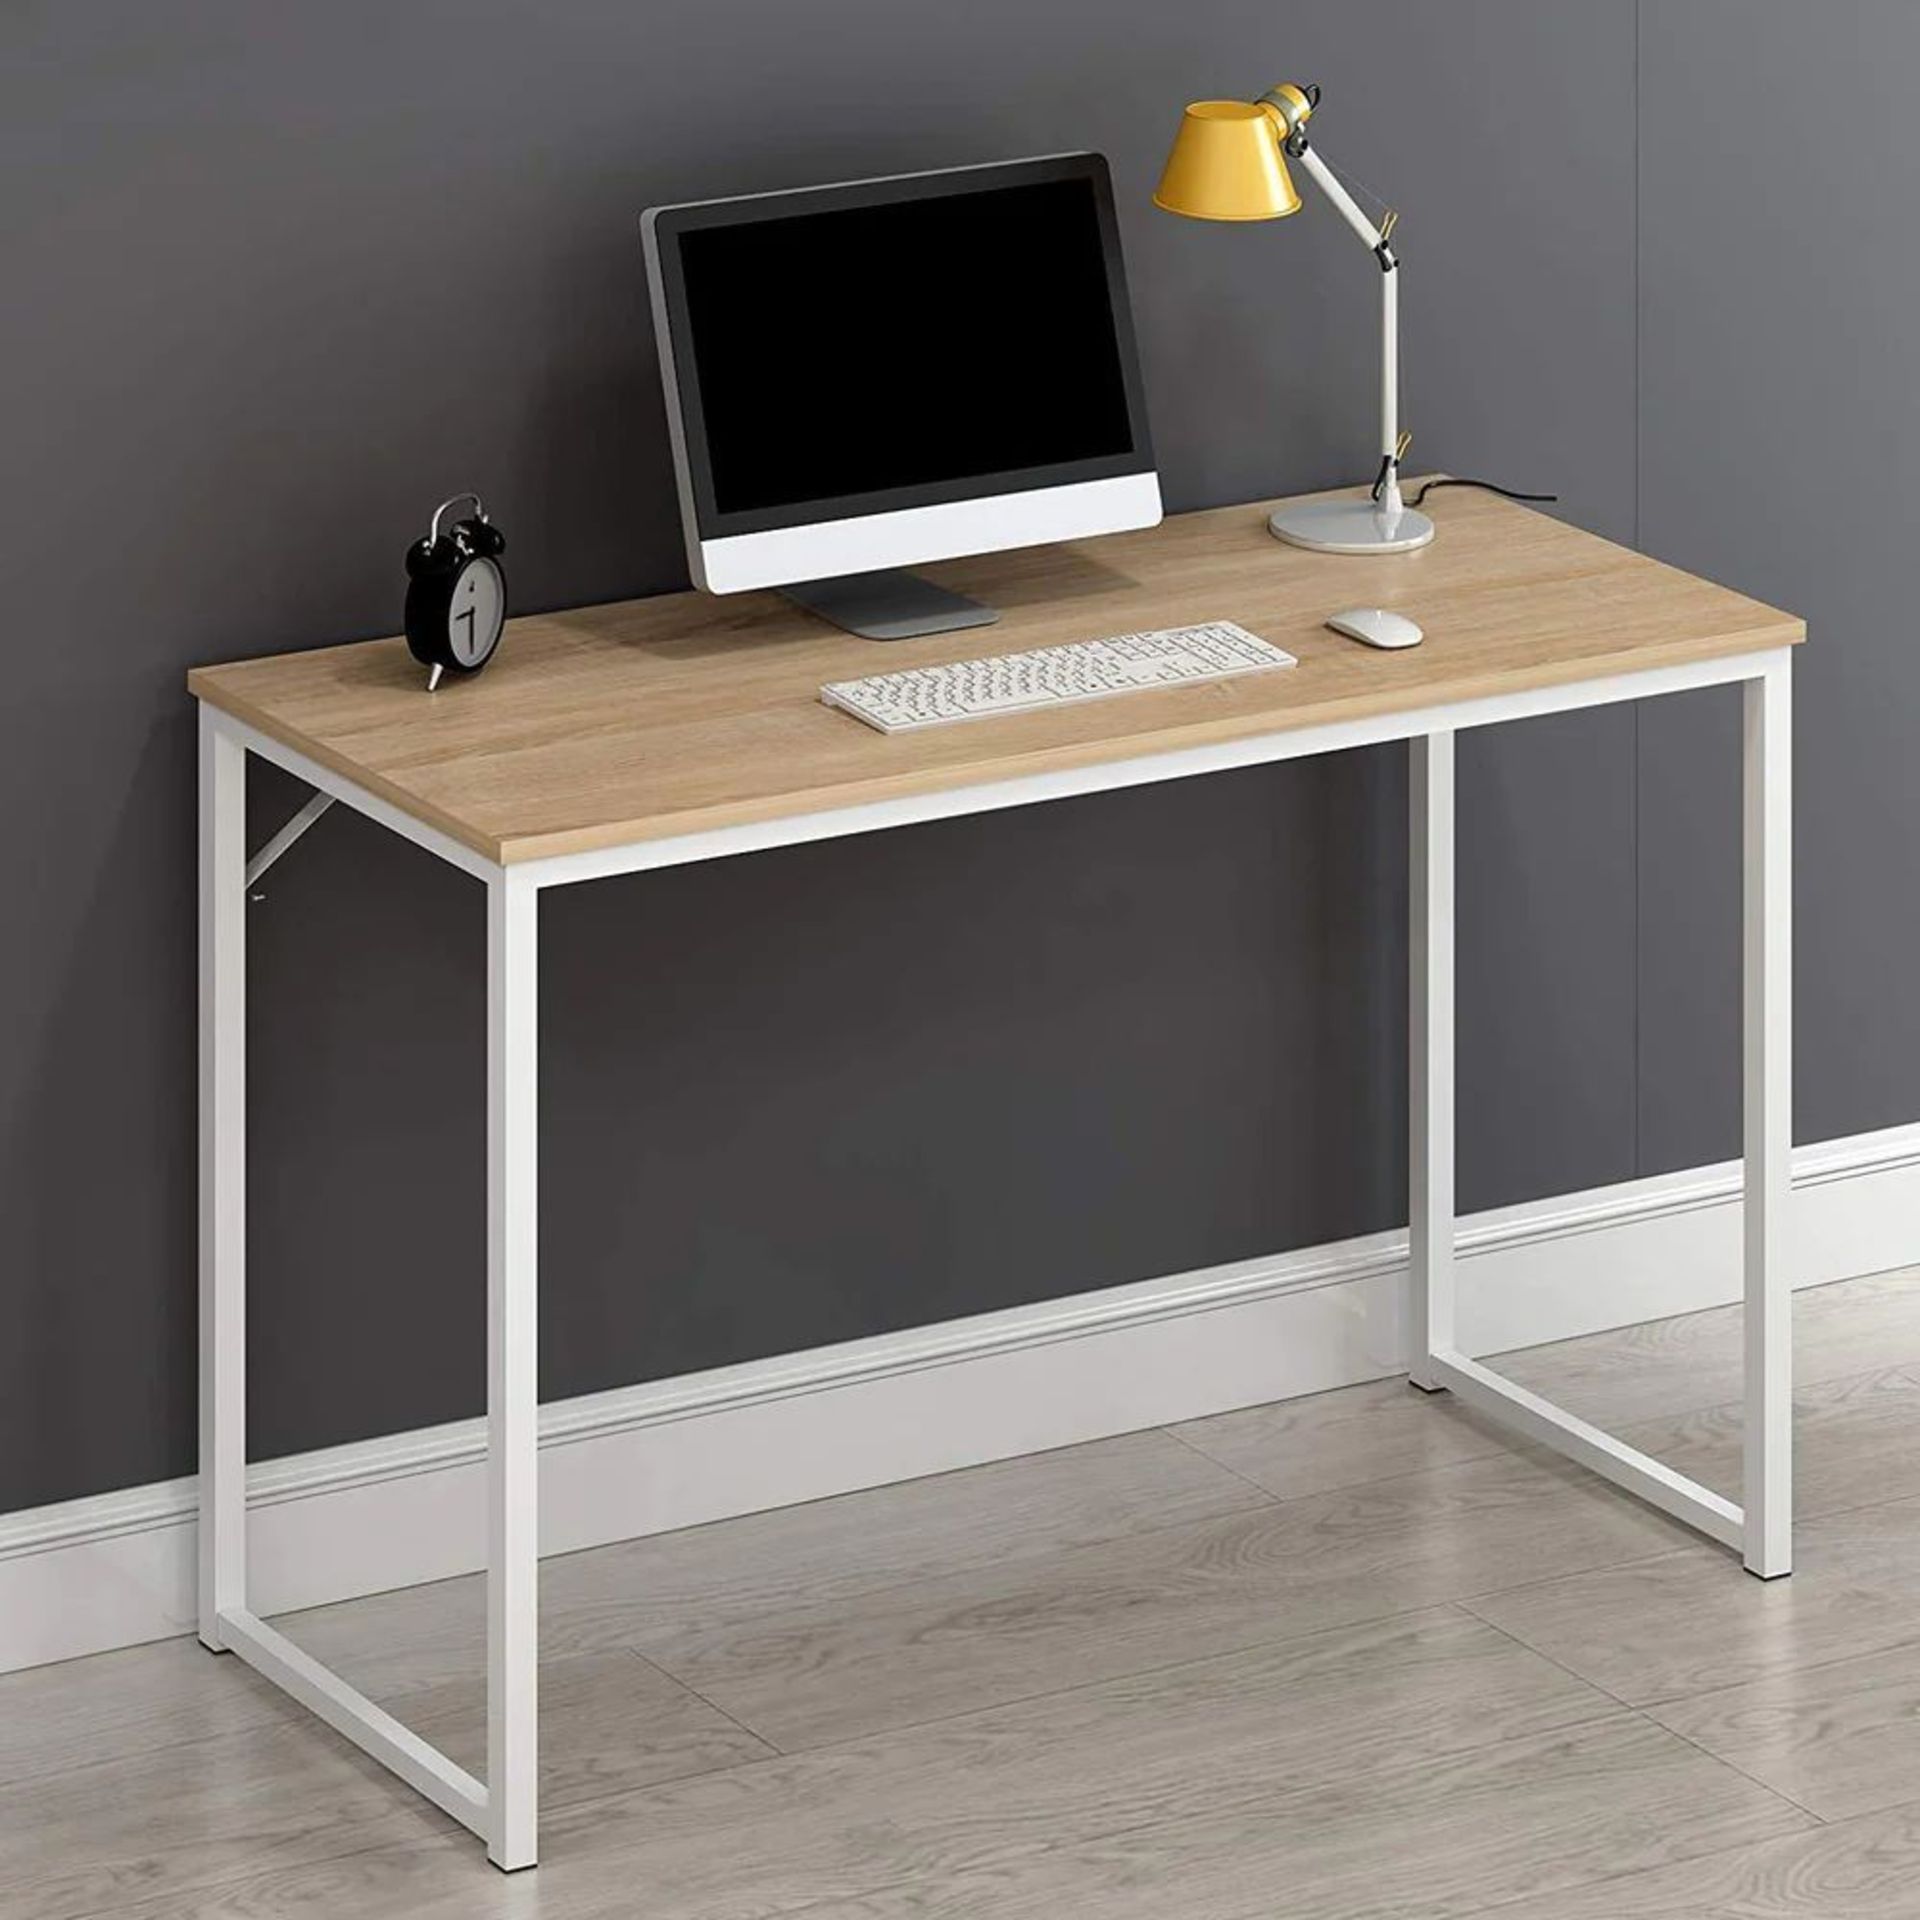 Berlin Compact Desk in Oak. - R14.3. A simple, sleek desk and sturdy desk, ideal for home office - Image 2 of 2